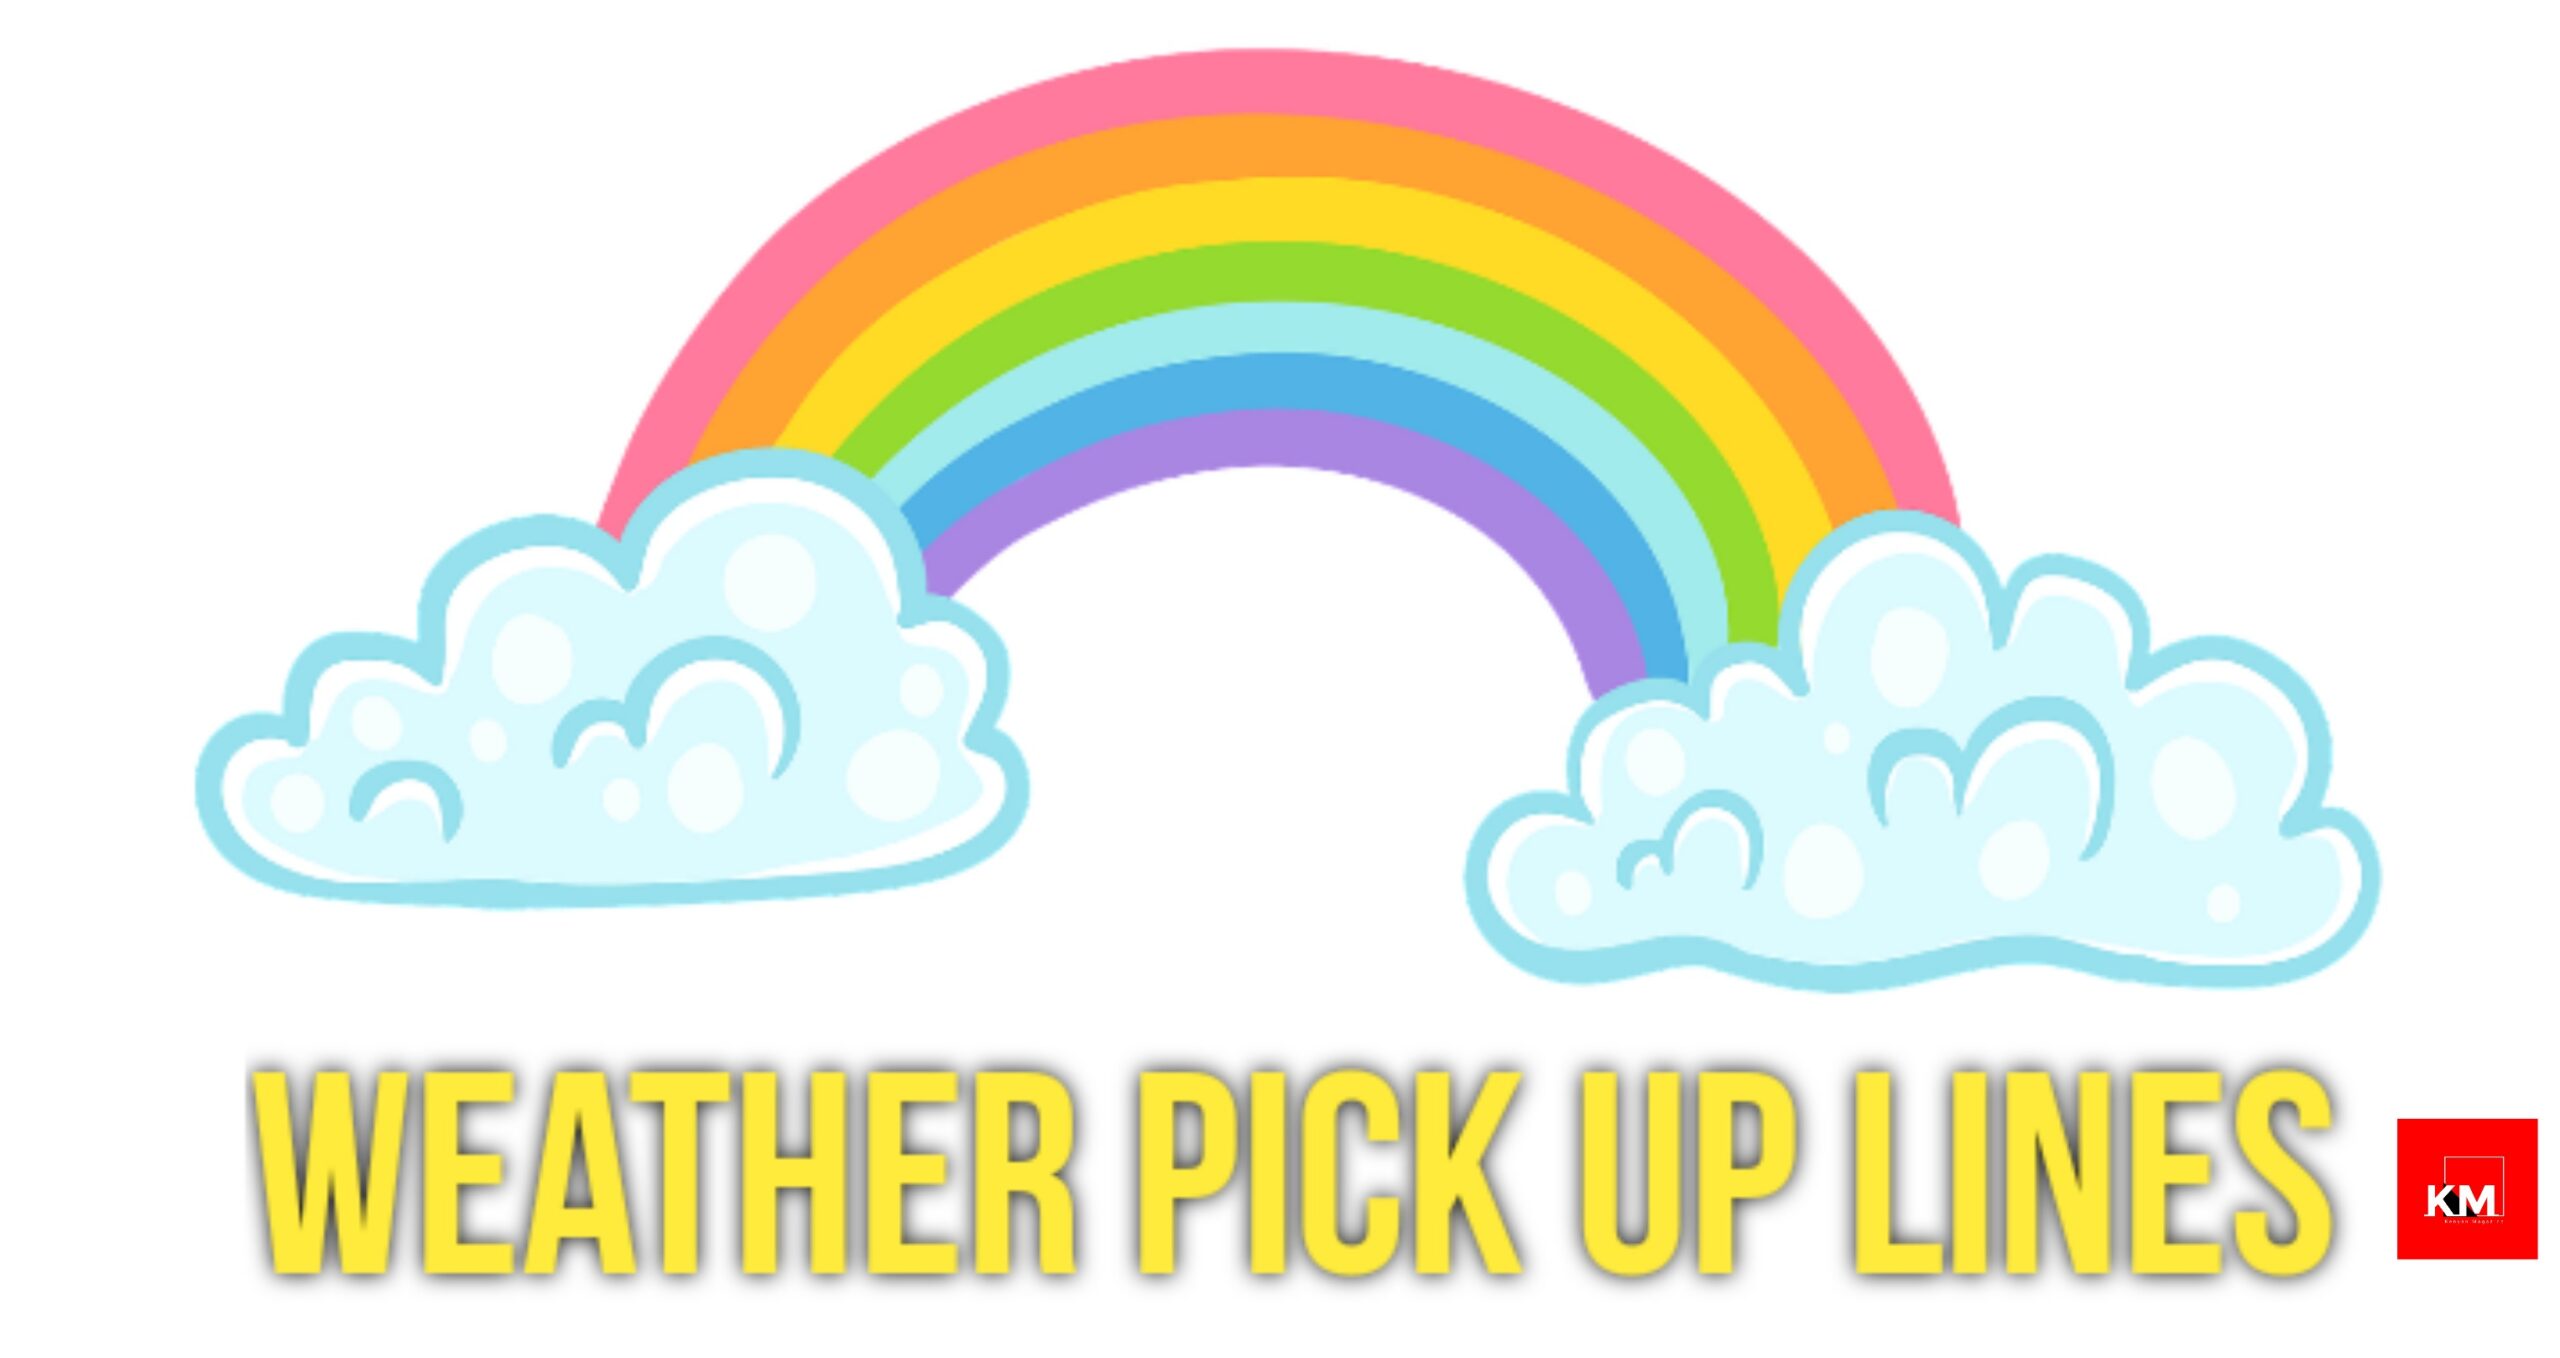 Weather pick up lines